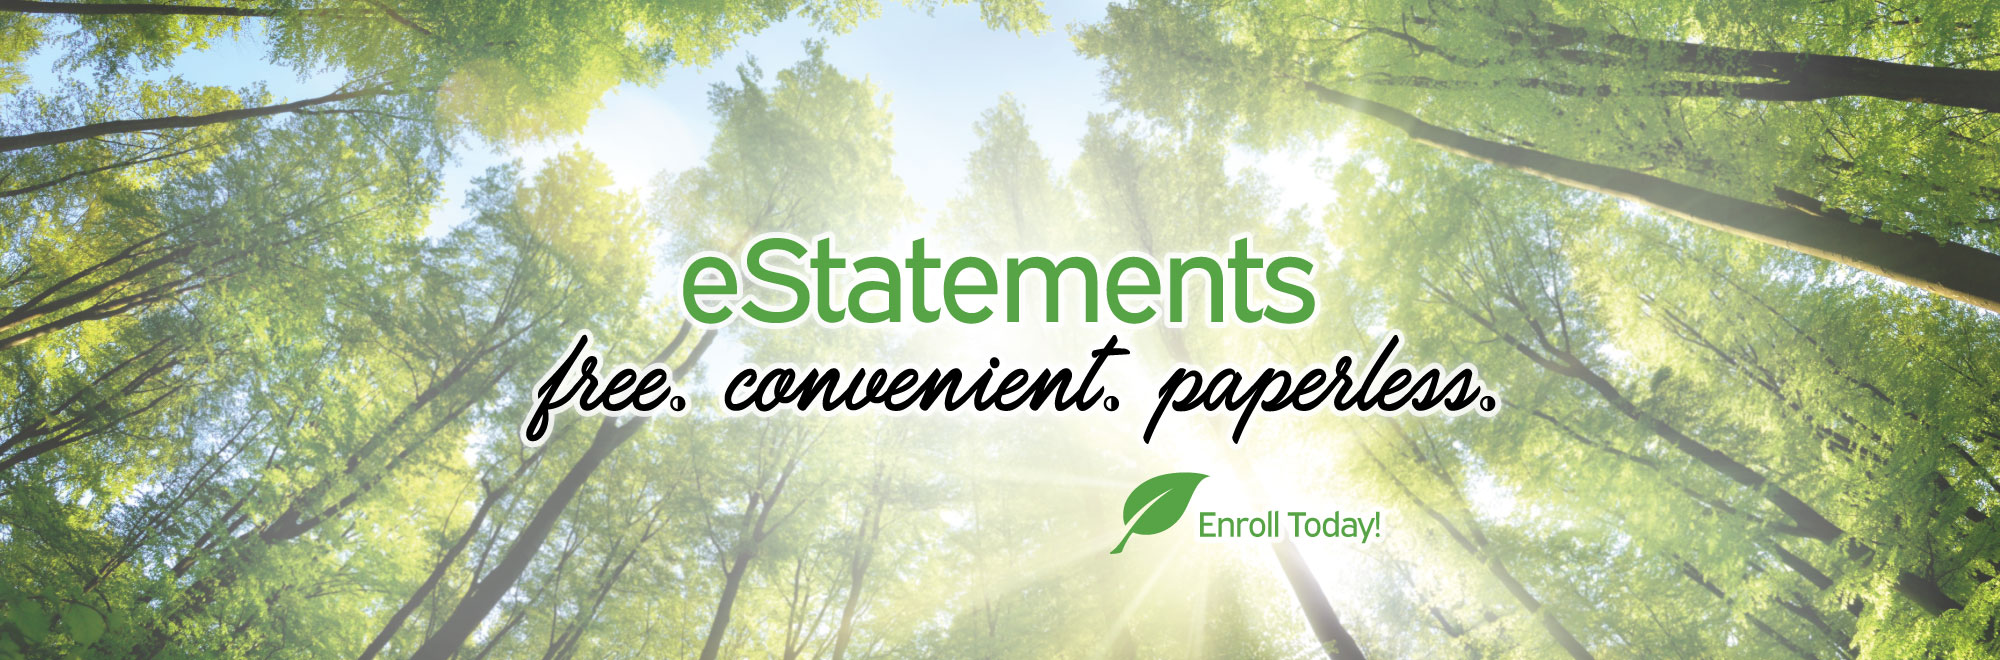 eStatements. free. convenient. paperless. Enroll Today!